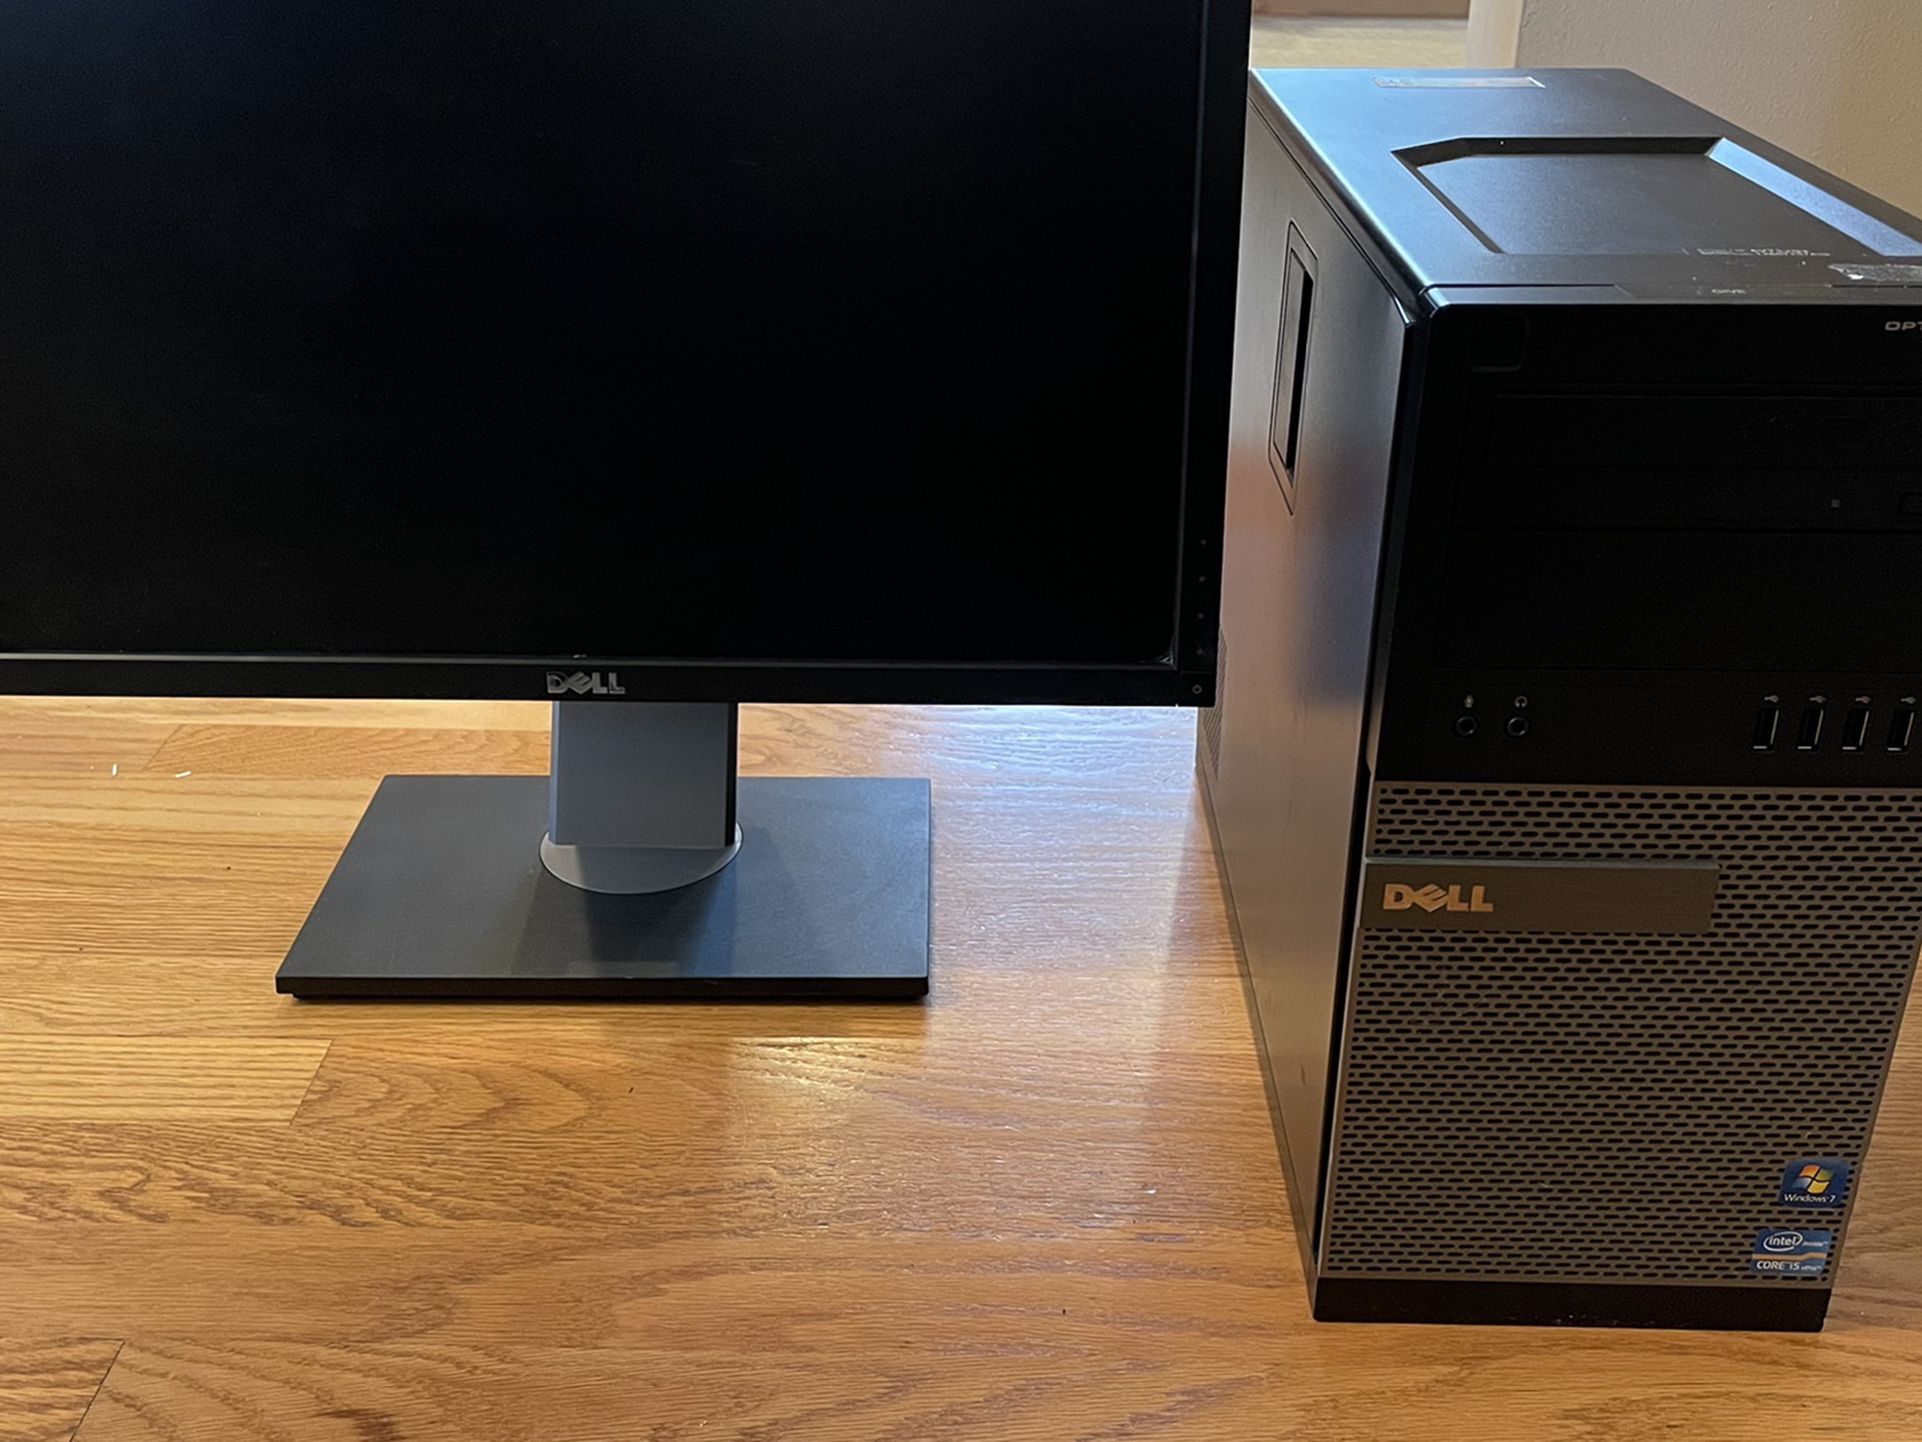 Dell Computer and Monitor